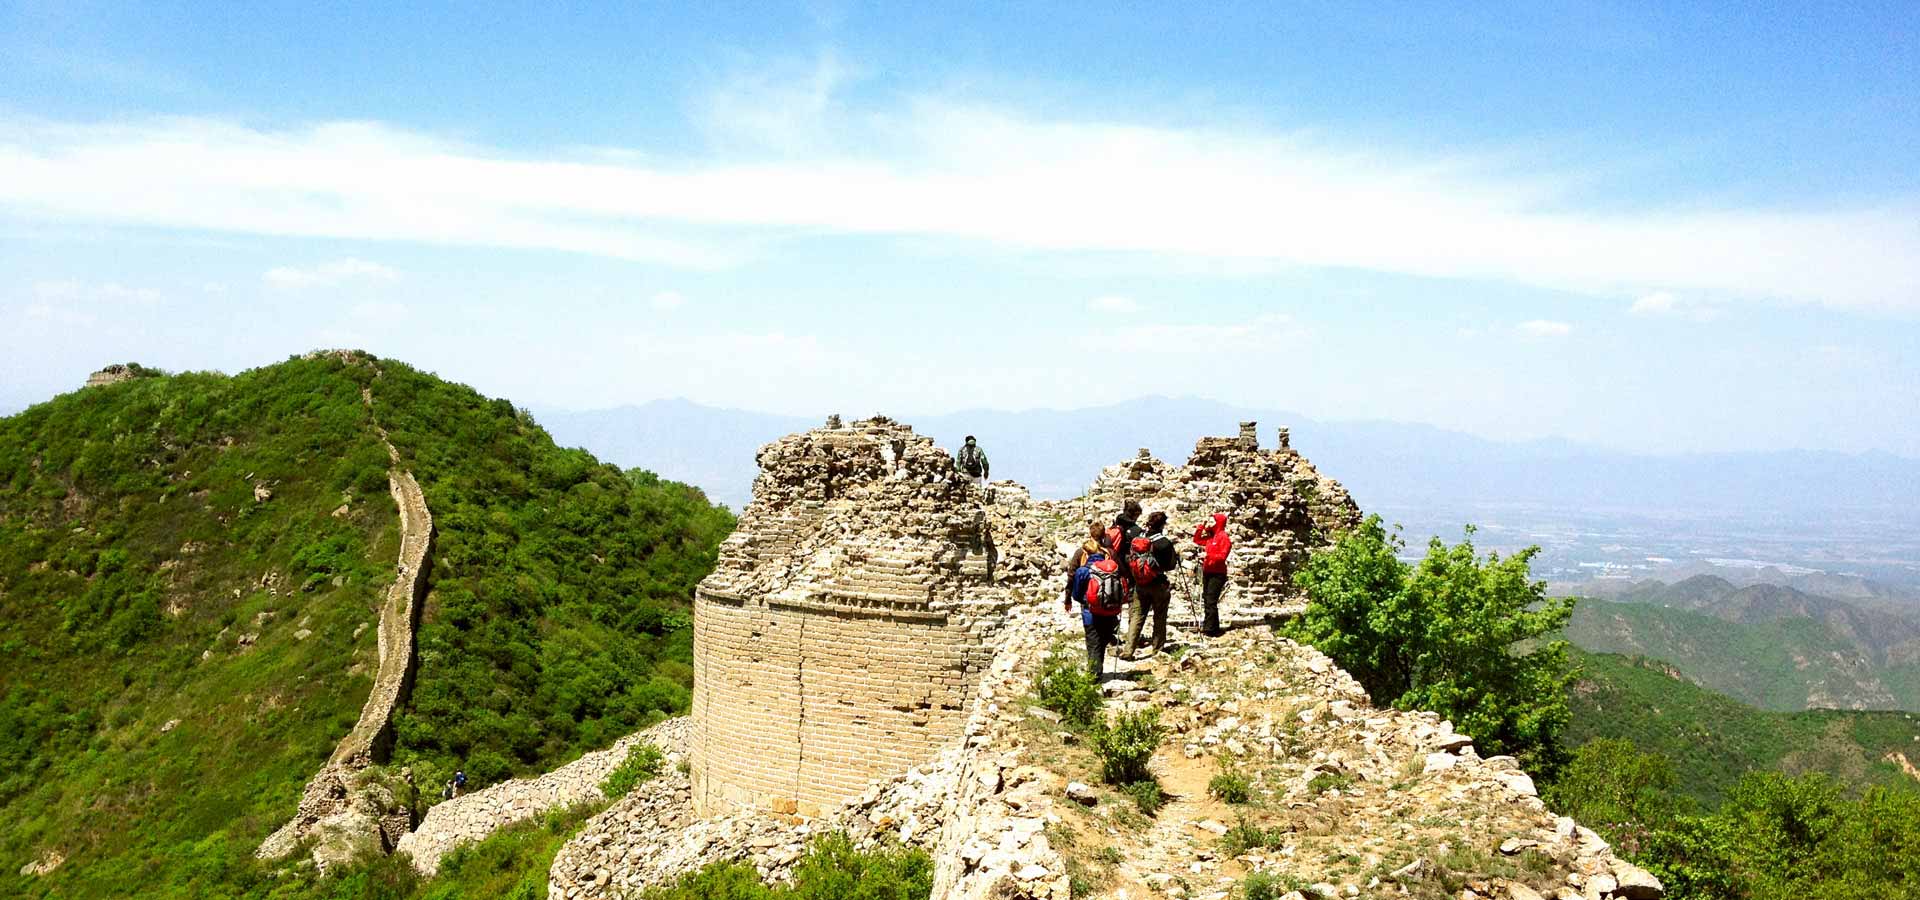 Win the Chance to Get Fit on the Great Wall This Autumn With Beijing Hiker&#039;s Hiking Festival, Sep 9